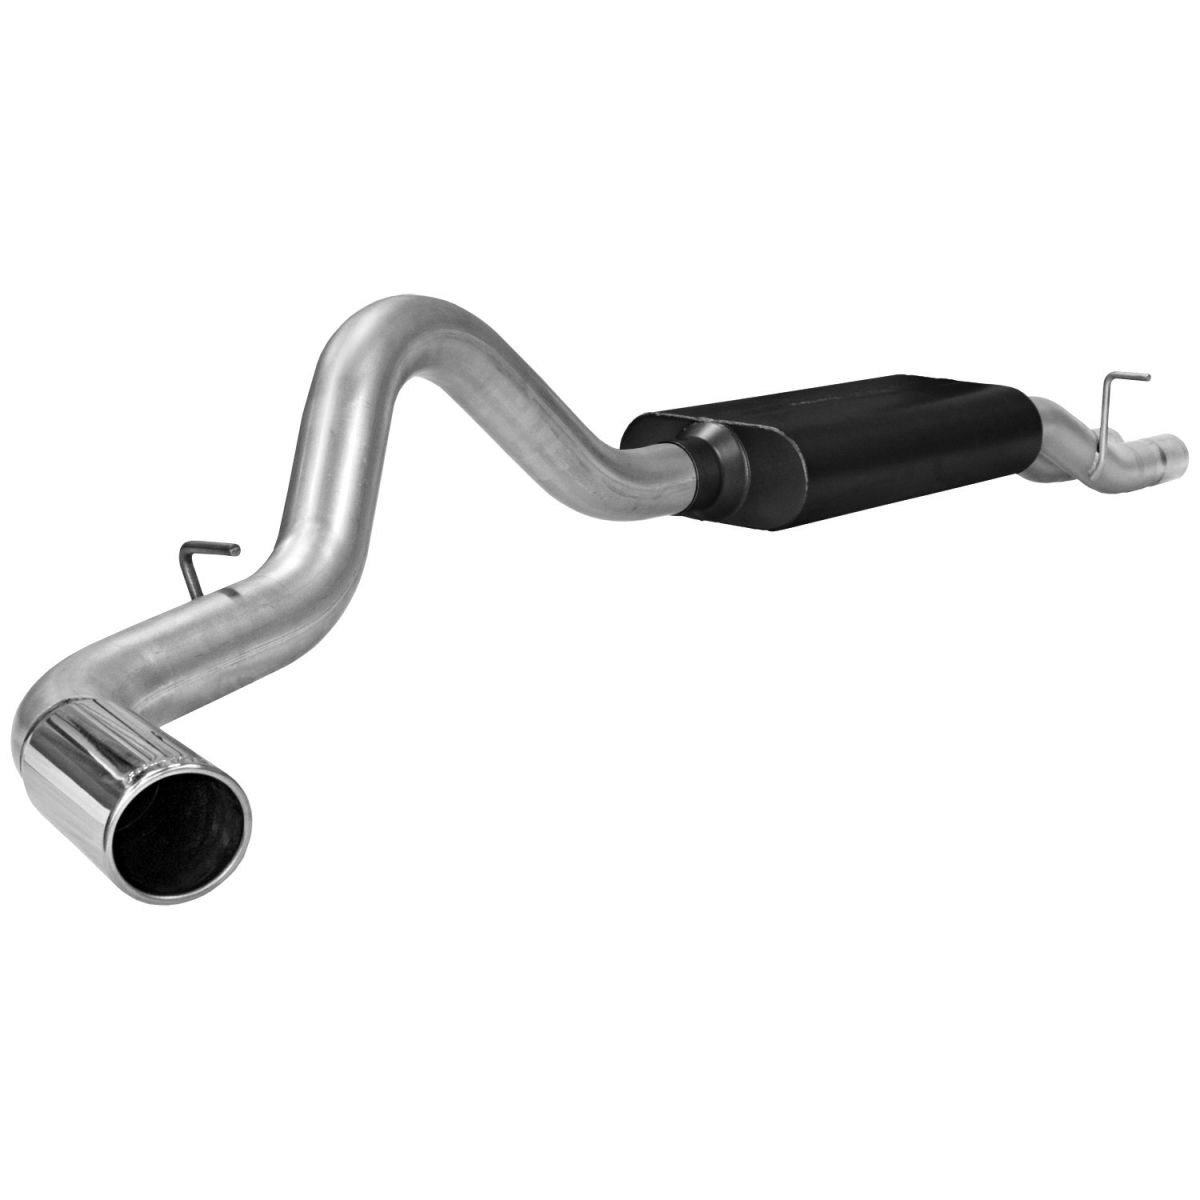 Flowmaster - Flowmaster American Thunder Cat-Back Exhaust For 01-07 GM 2500/3500 HD 6.0L/8.1L